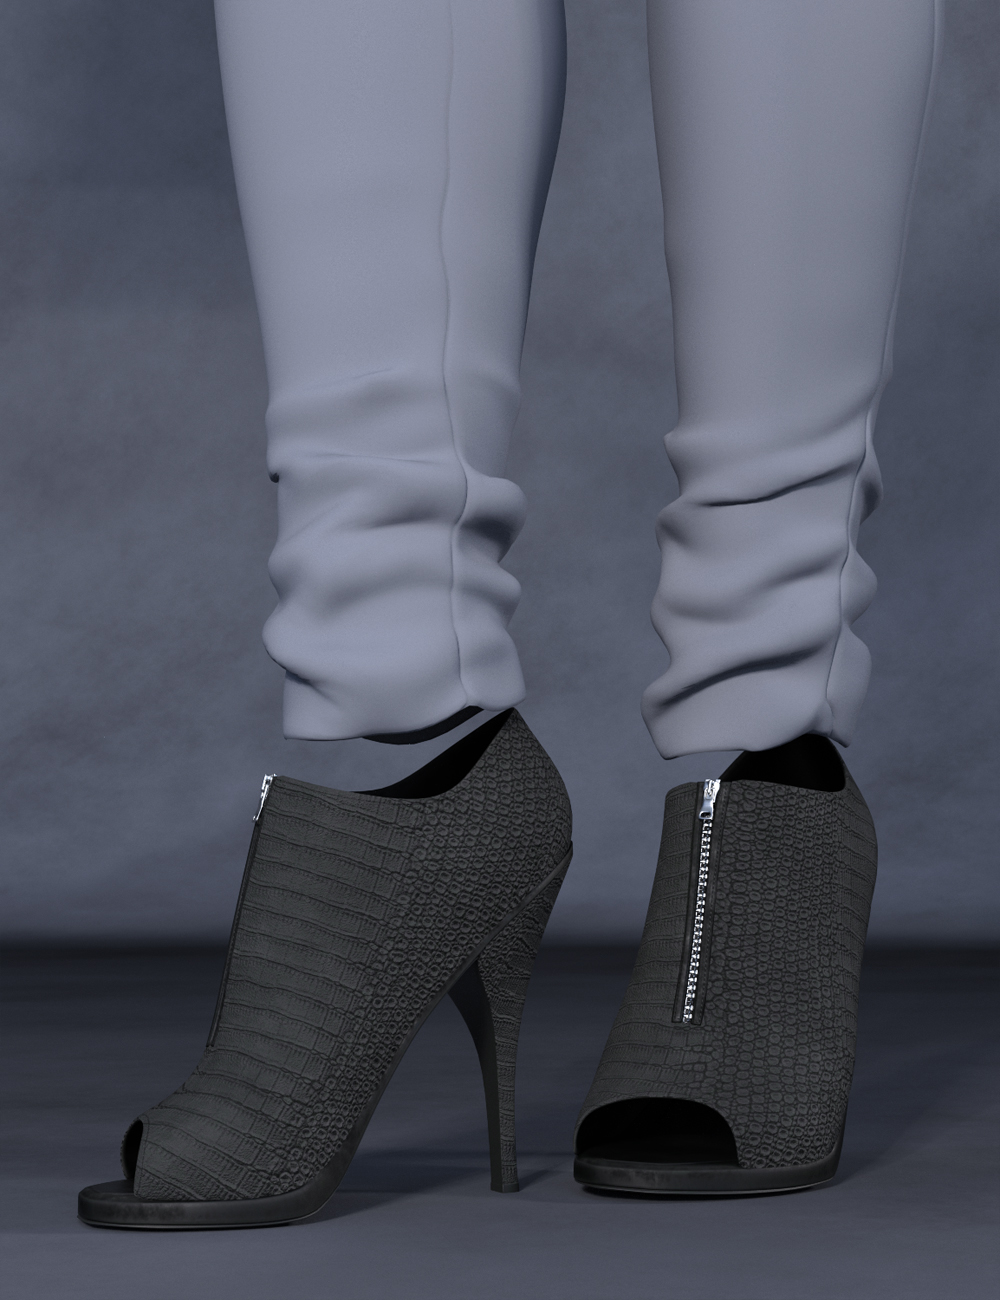 Fancy Pants Shoes for Genesis 8 and 8.1 Females by: Nikisatez, 3D Models by Daz 3D